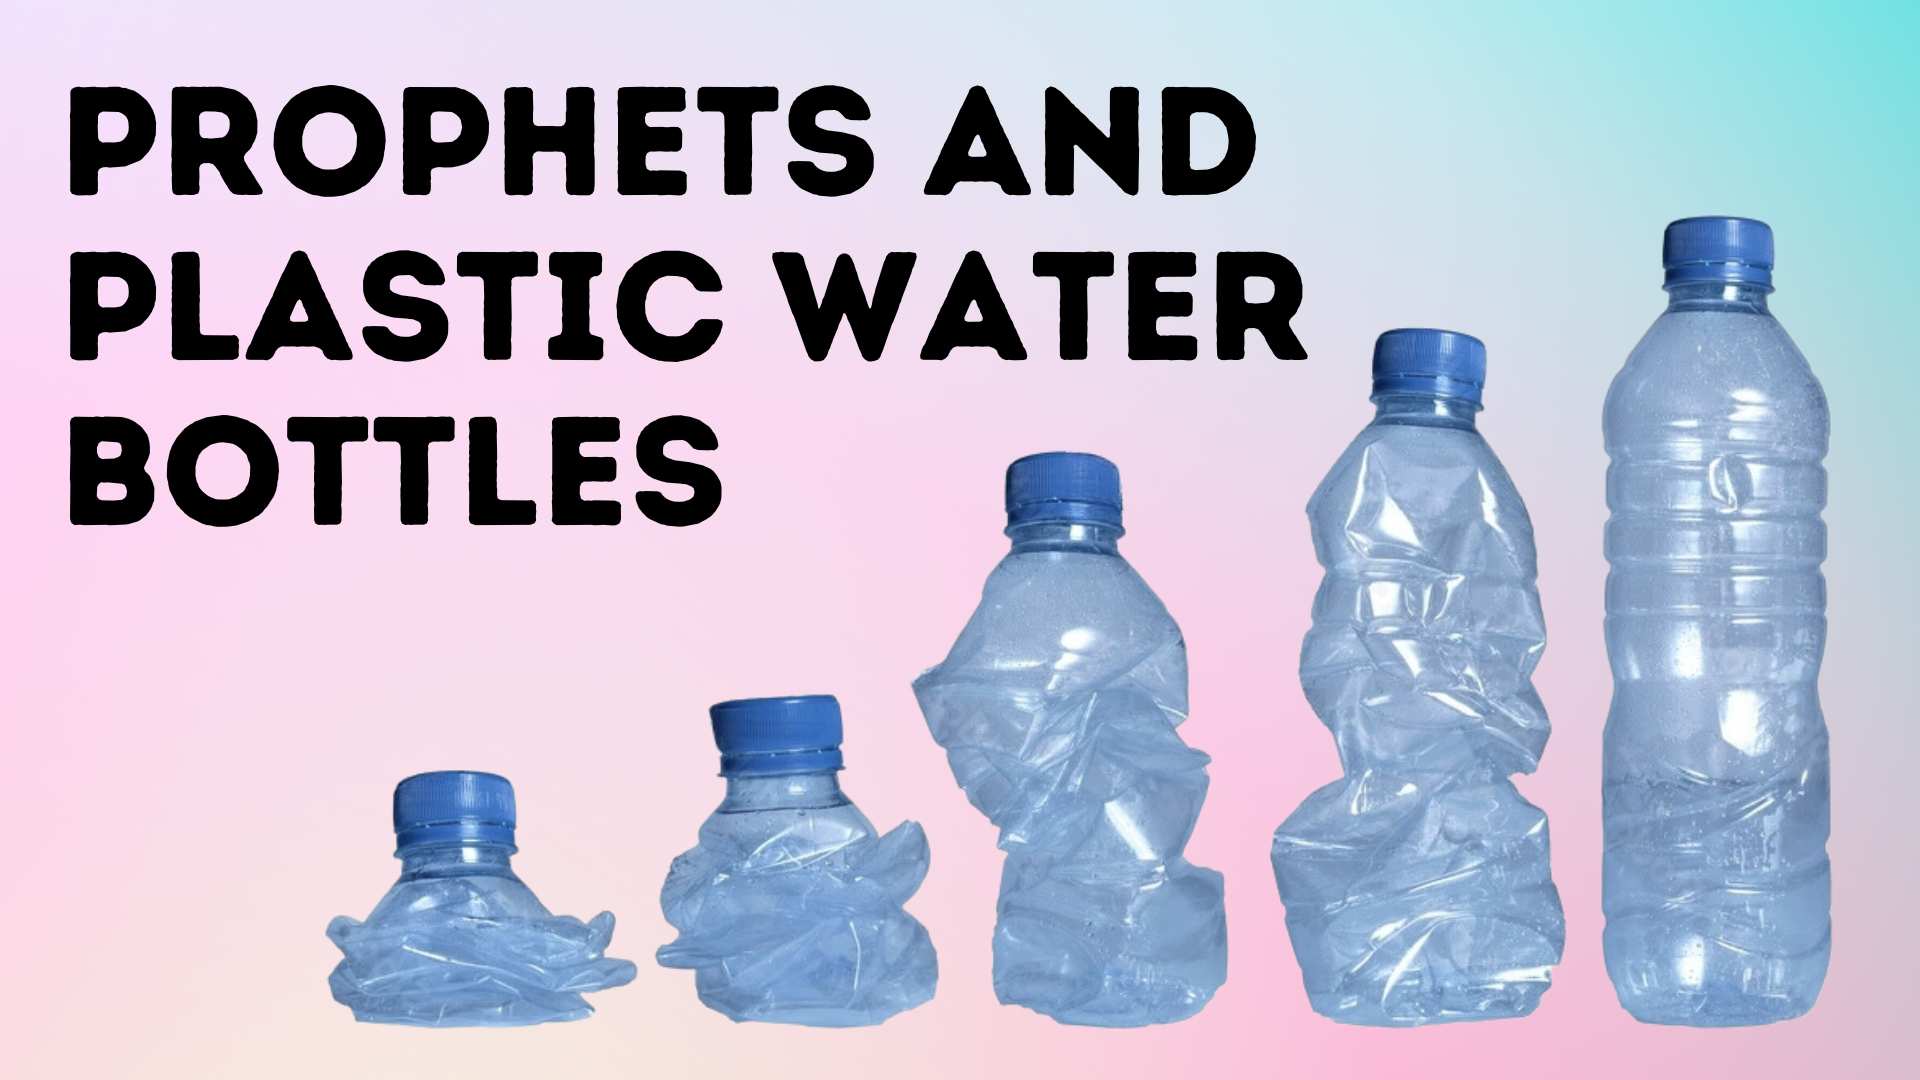 Prophets and Plastic Water Bottles